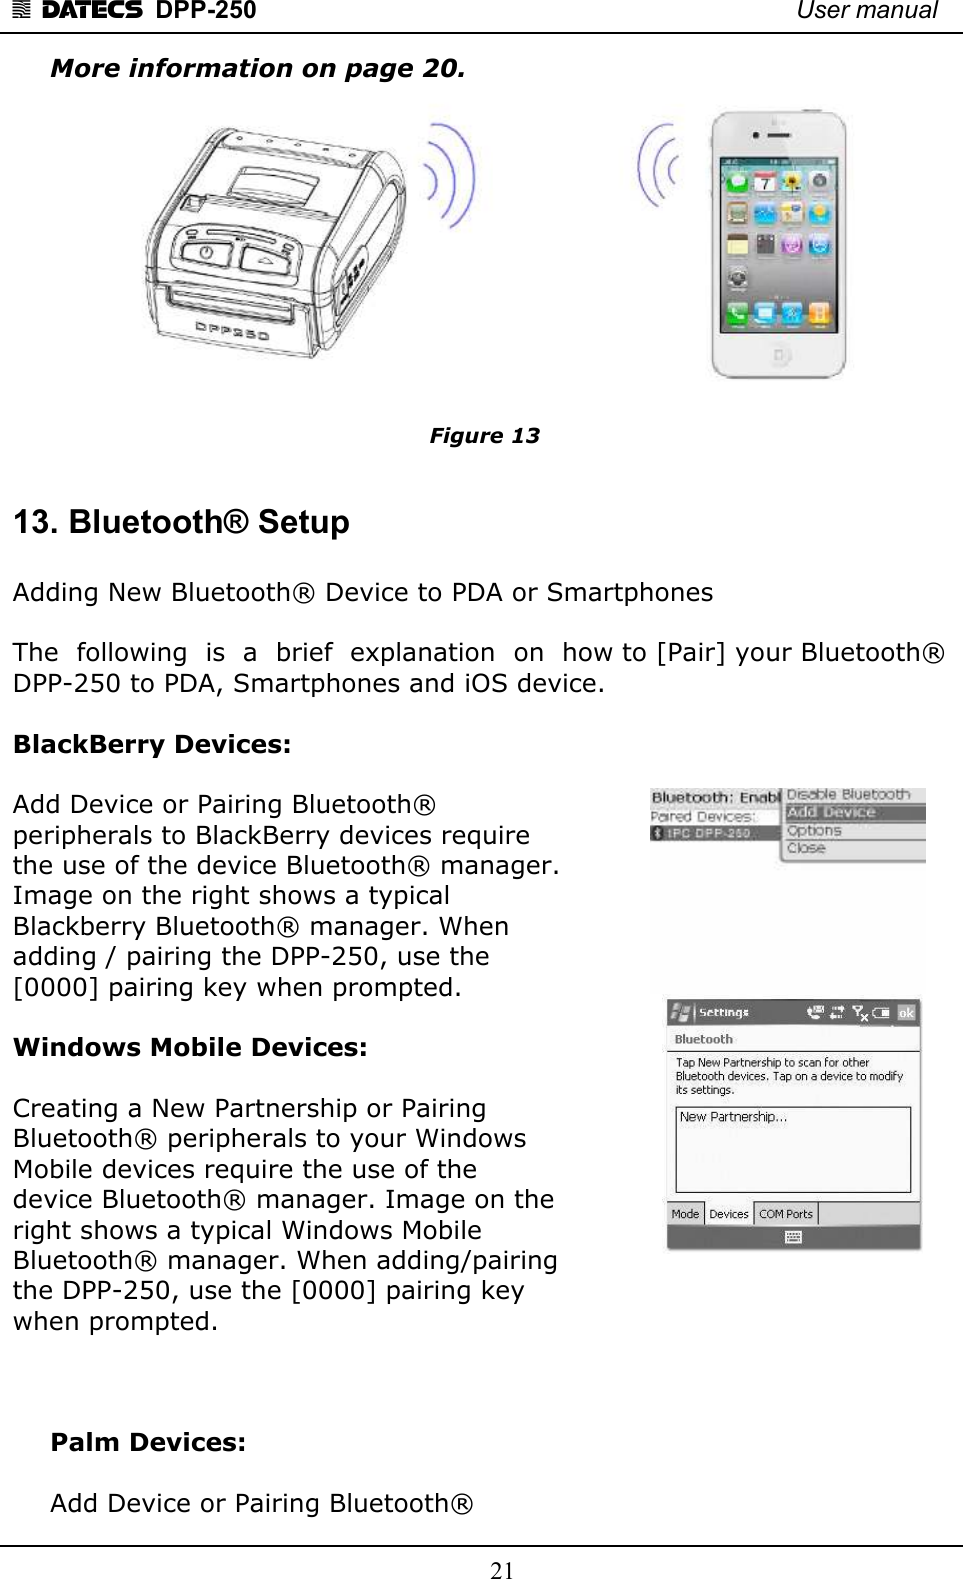 1 DATECS  DPP-250    User manual     21 More information on page 20.  Figure 13  13. Bluetooth® Setup  Adding New Bluetooth® Device to PDA or Smartphones   The  following  is  a  brief  explanation  on  how to [Pair] your Bluetooth® DPP-250 to PDA, Smartphones and iOS device.  BlackBerry Devices:   Add Device or Pairing Bluetooth® peripherals to BlackBerry devices require  the use of the device Bluetooth® manager.  Image on the right shows a typical  Blackberry Bluetooth® manager. When  adding / pairing the DPP-250, use the  [0000] pairing key when prompted.  Windows Mobile Devices:   Creating a New Partnership or Pairing  Bluetooth® peripherals to your Windows  Mobile devices require the use of the  device Bluetooth® manager. Image on the  right shows a typical Windows Mobile  Bluetooth® manager. When adding/pairing  the DPP-250, use the [0000] pairing key  when prompted.    Palm Devices:   Add Device or Pairing Bluetooth® 